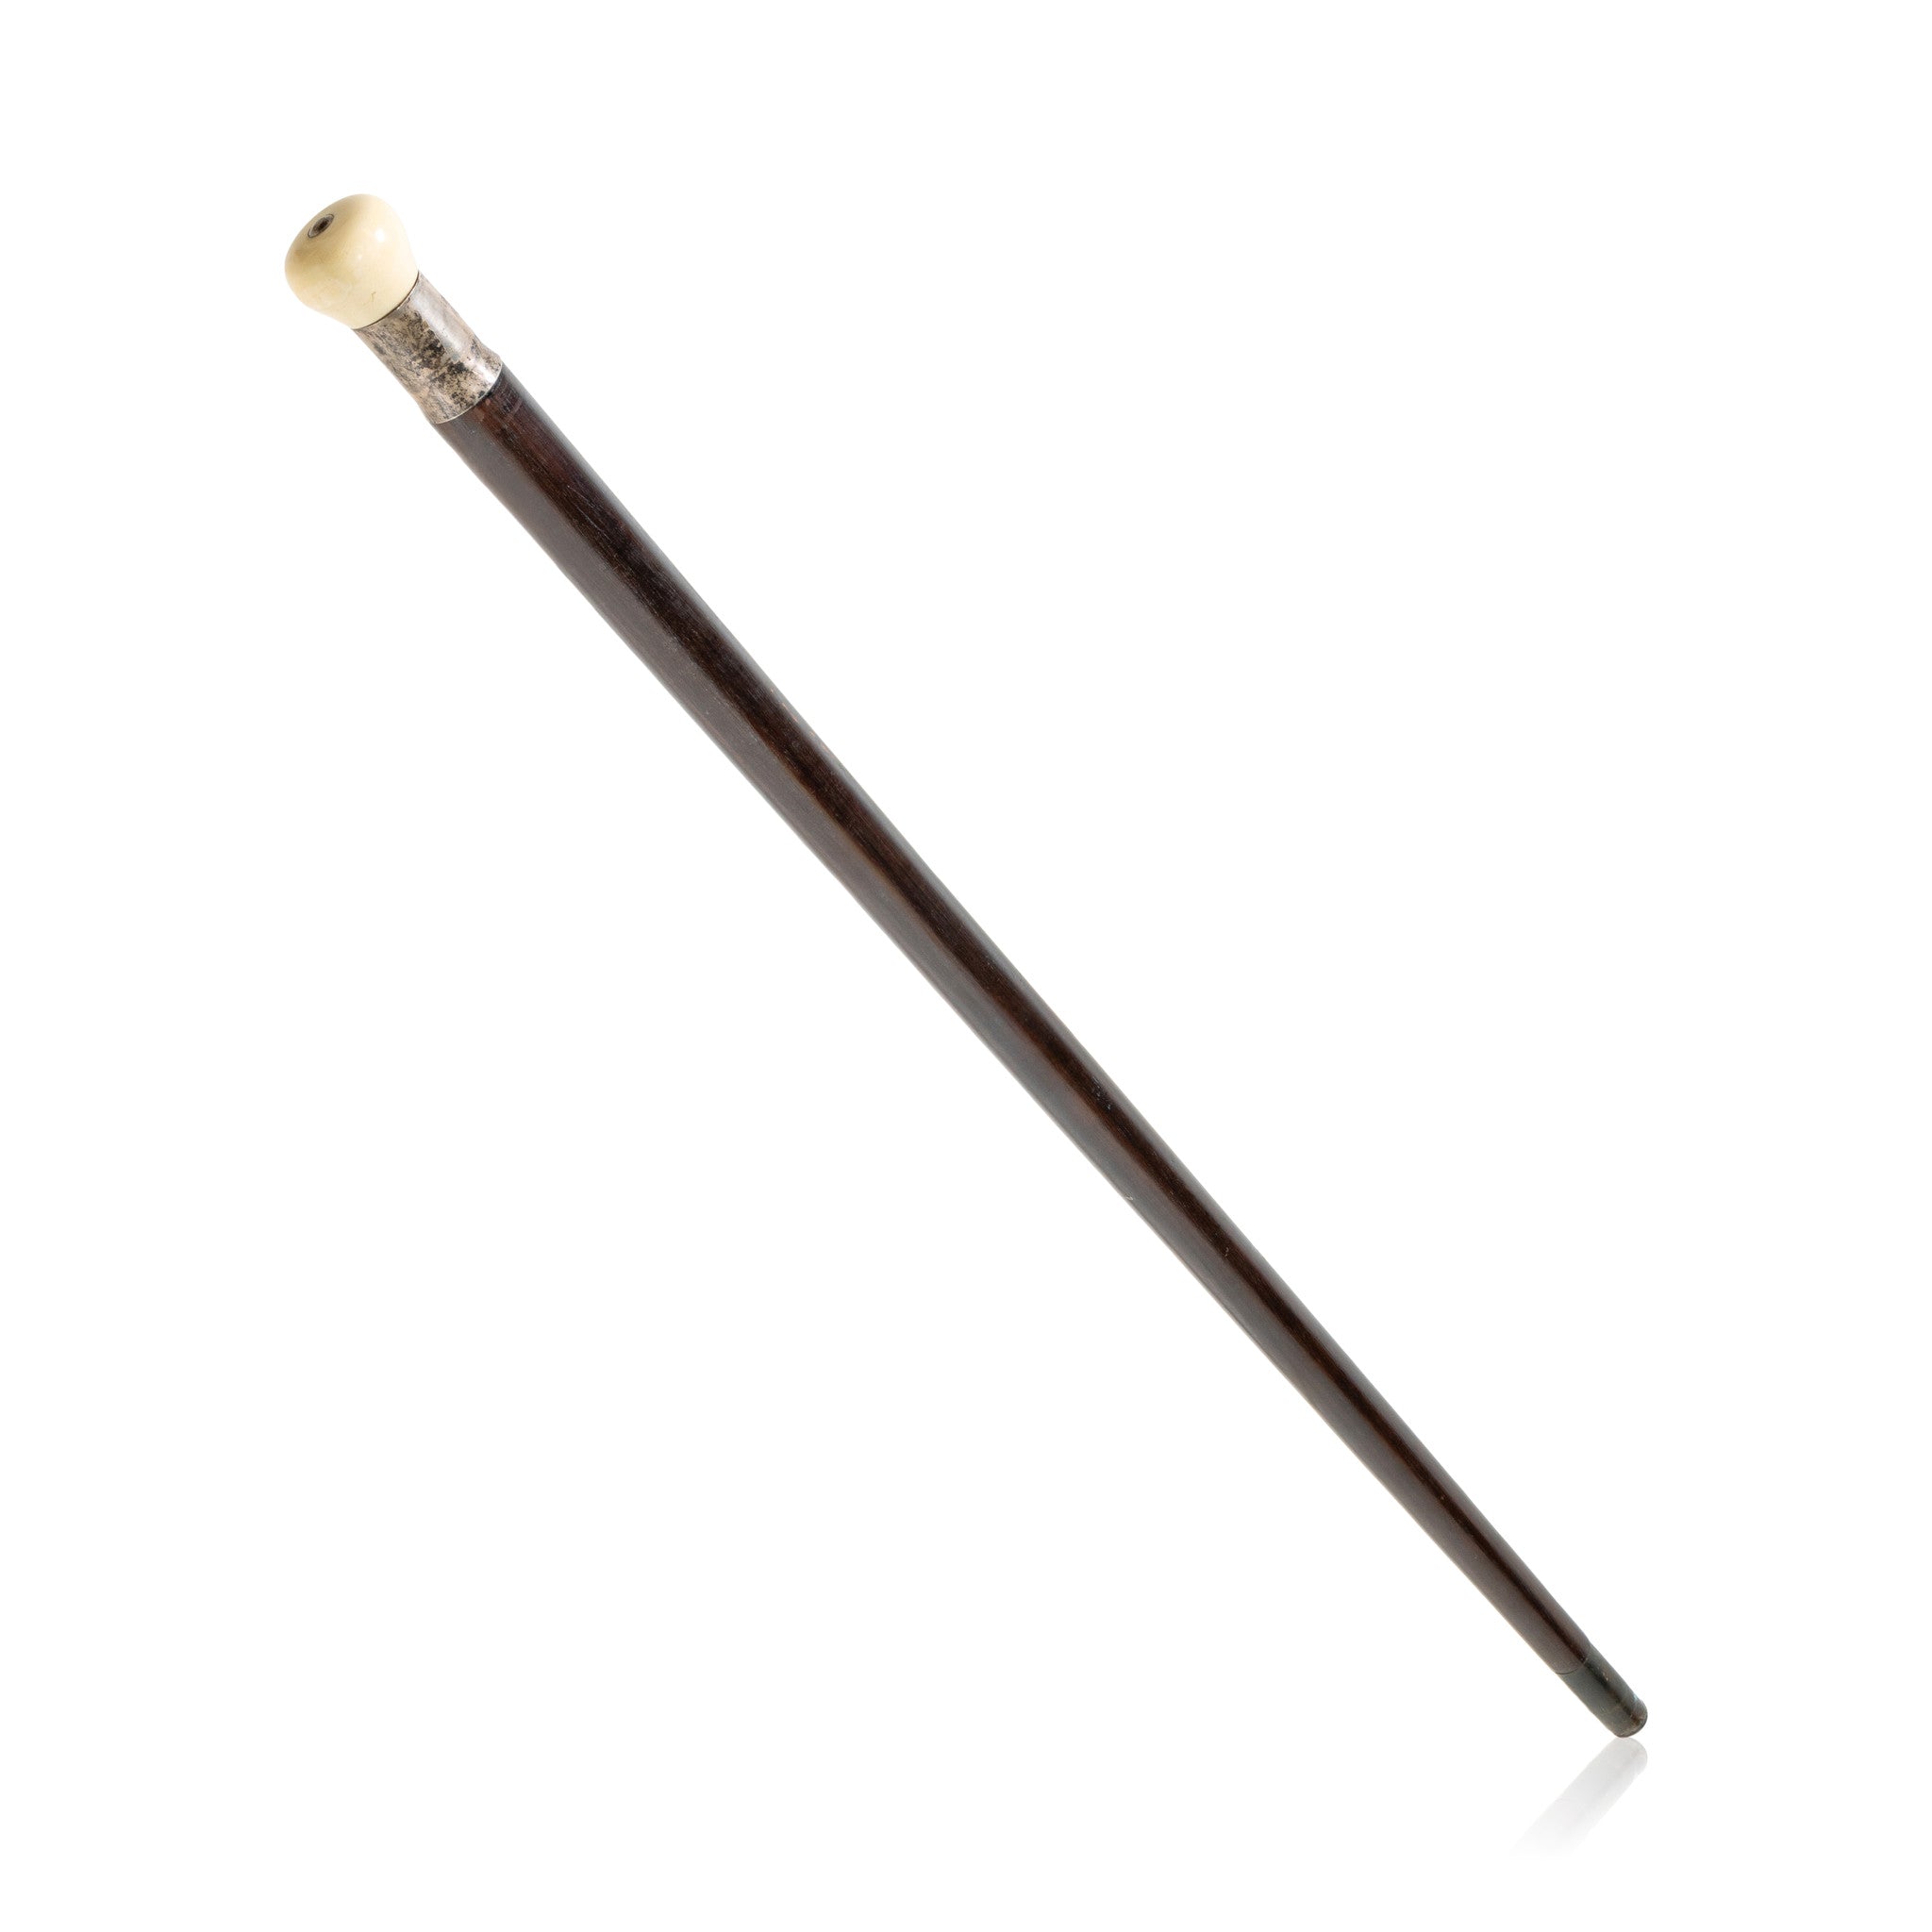 Doctor's Cane